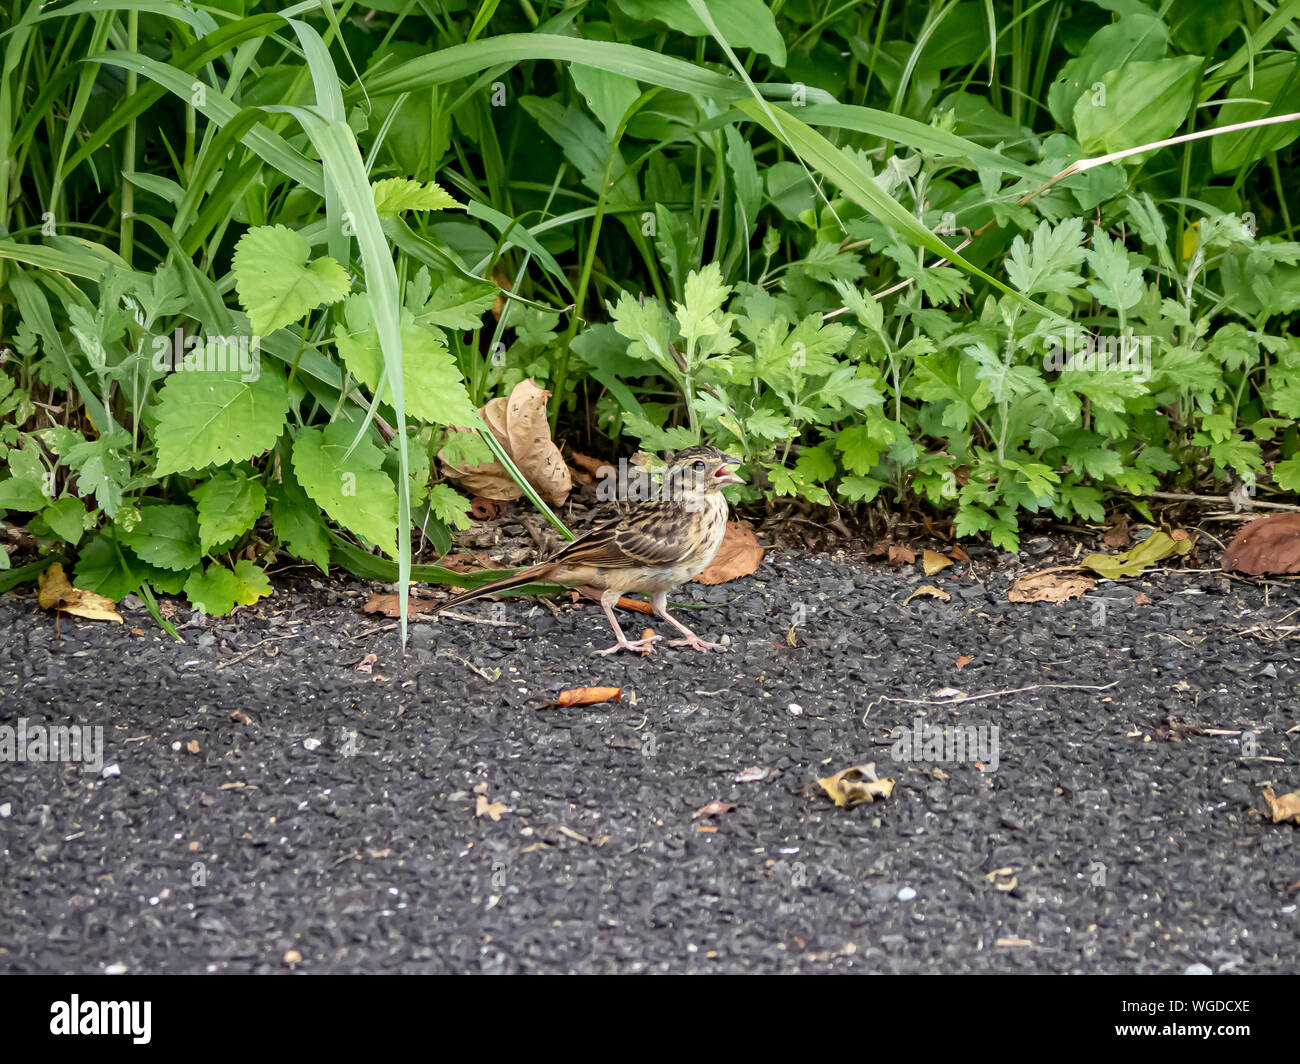 A Japanese skylark, Alauda arvensis, stands along a country road in Saza Village, Japan. Stock Photo